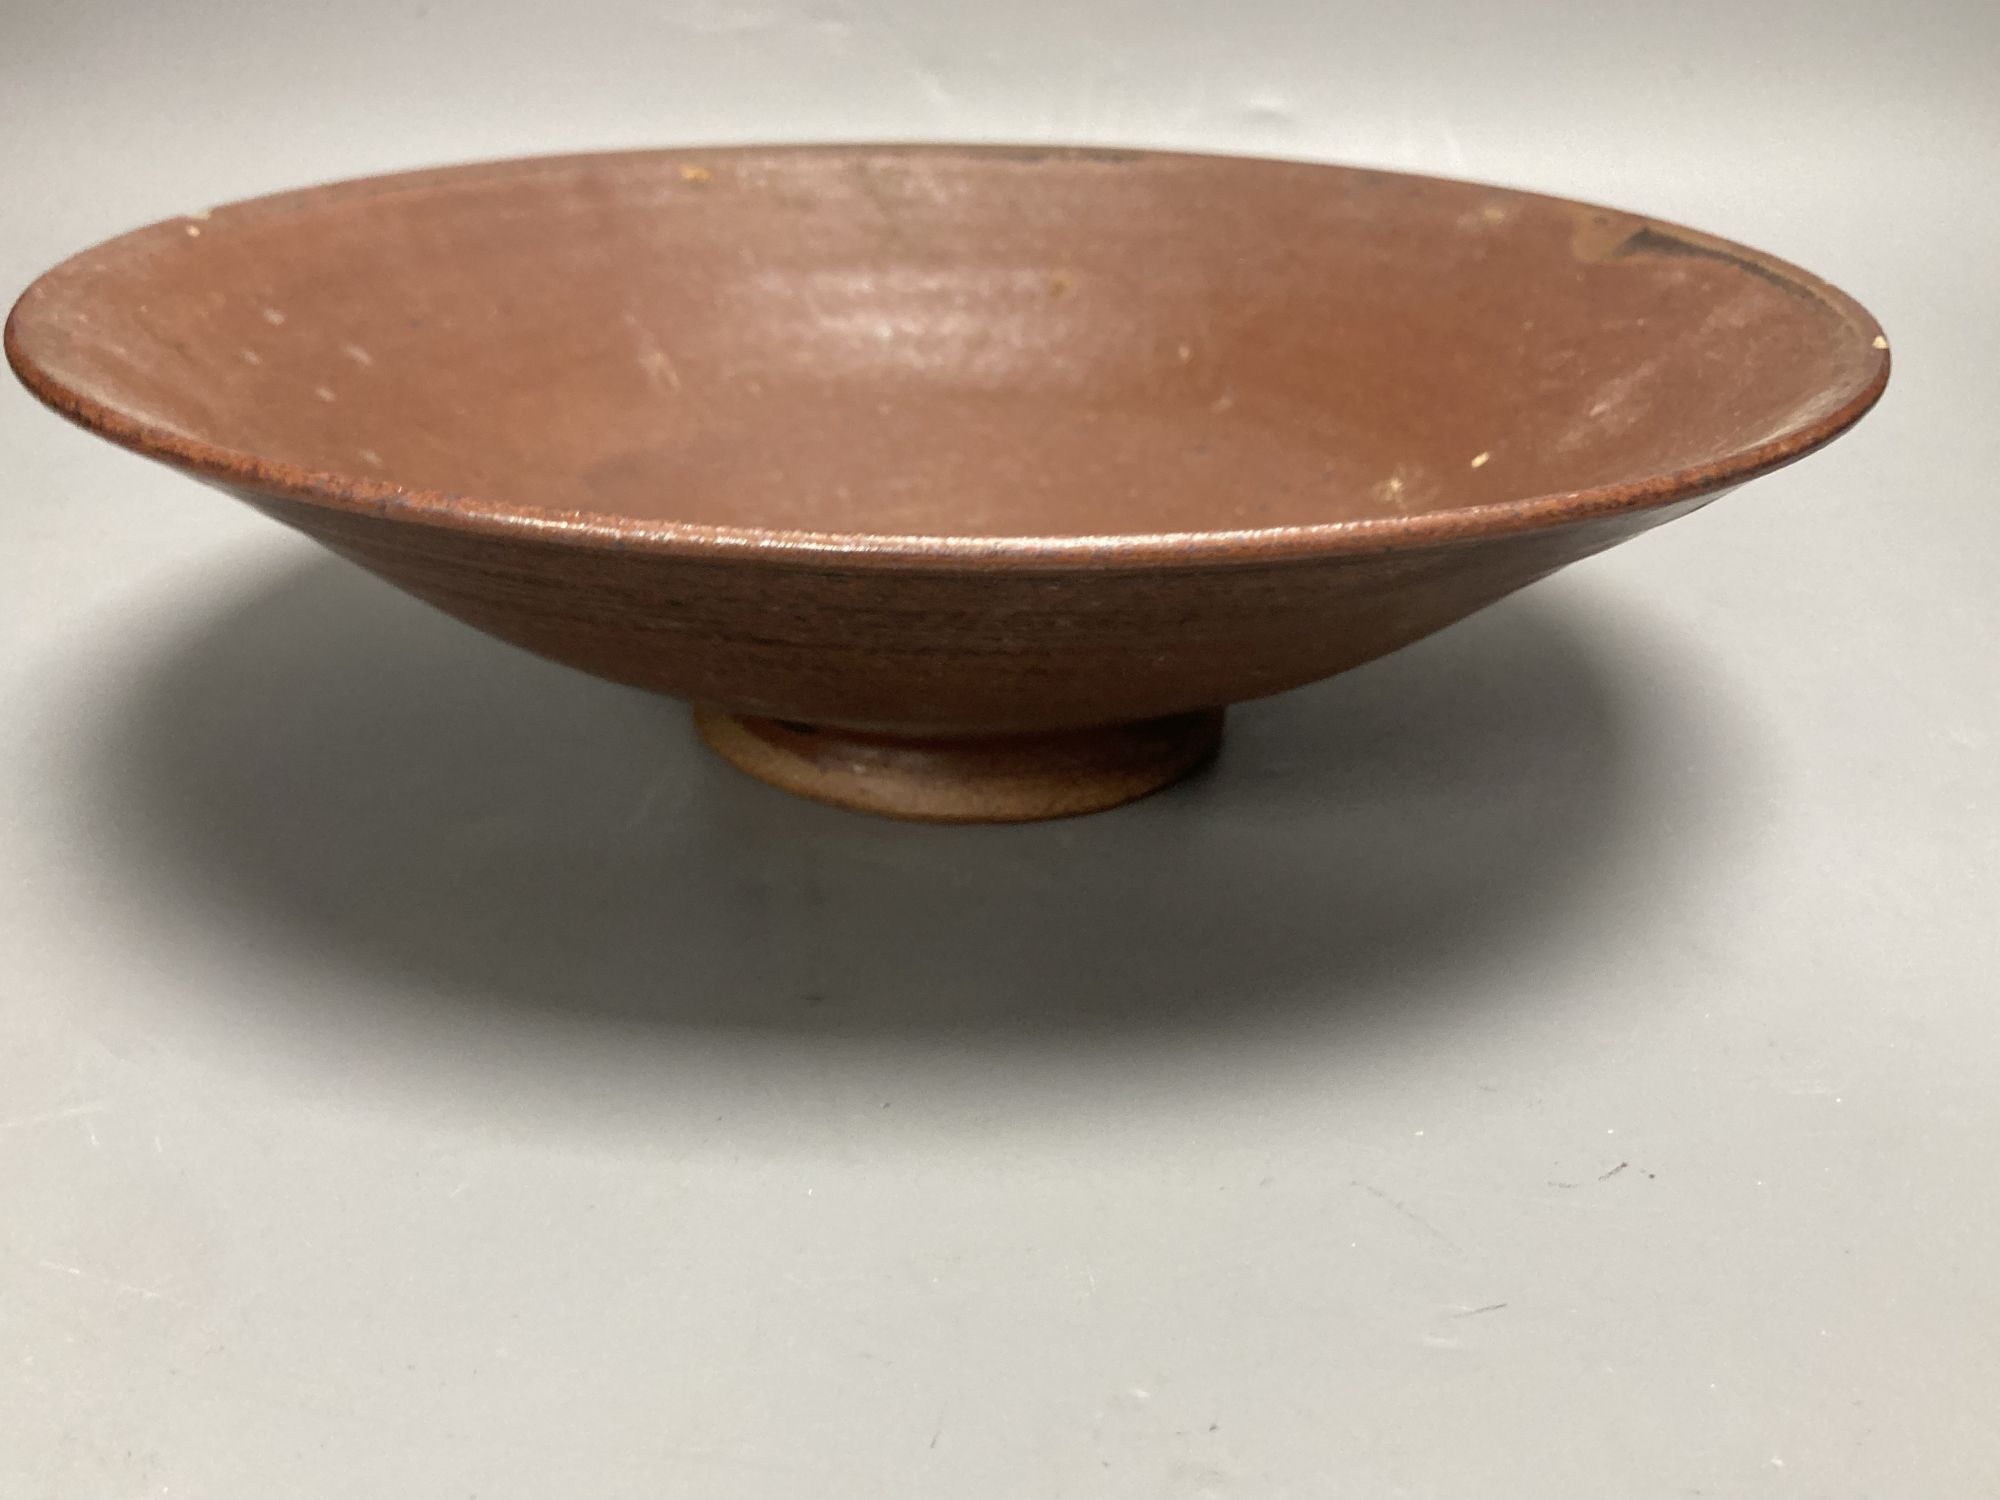 Two Studio pottery bowls and a similar vase